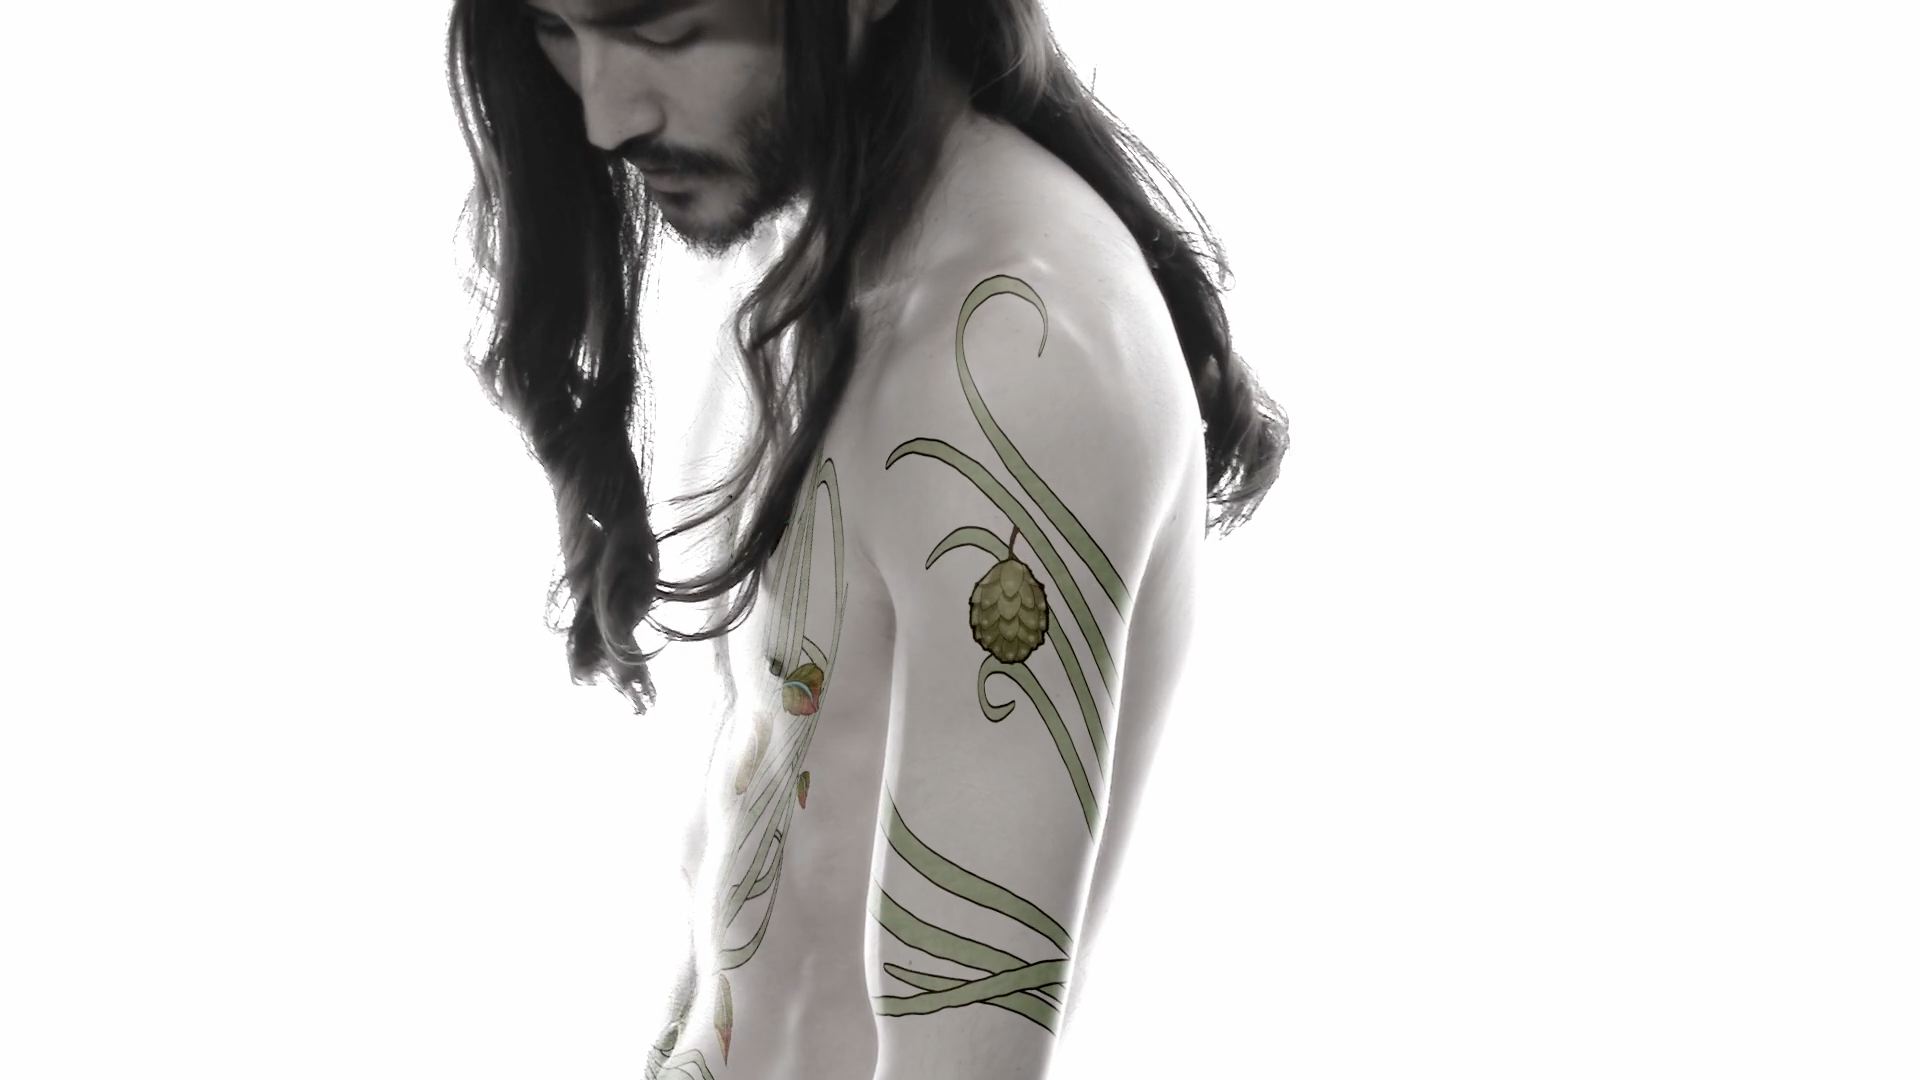 A male model with animated tattoos.